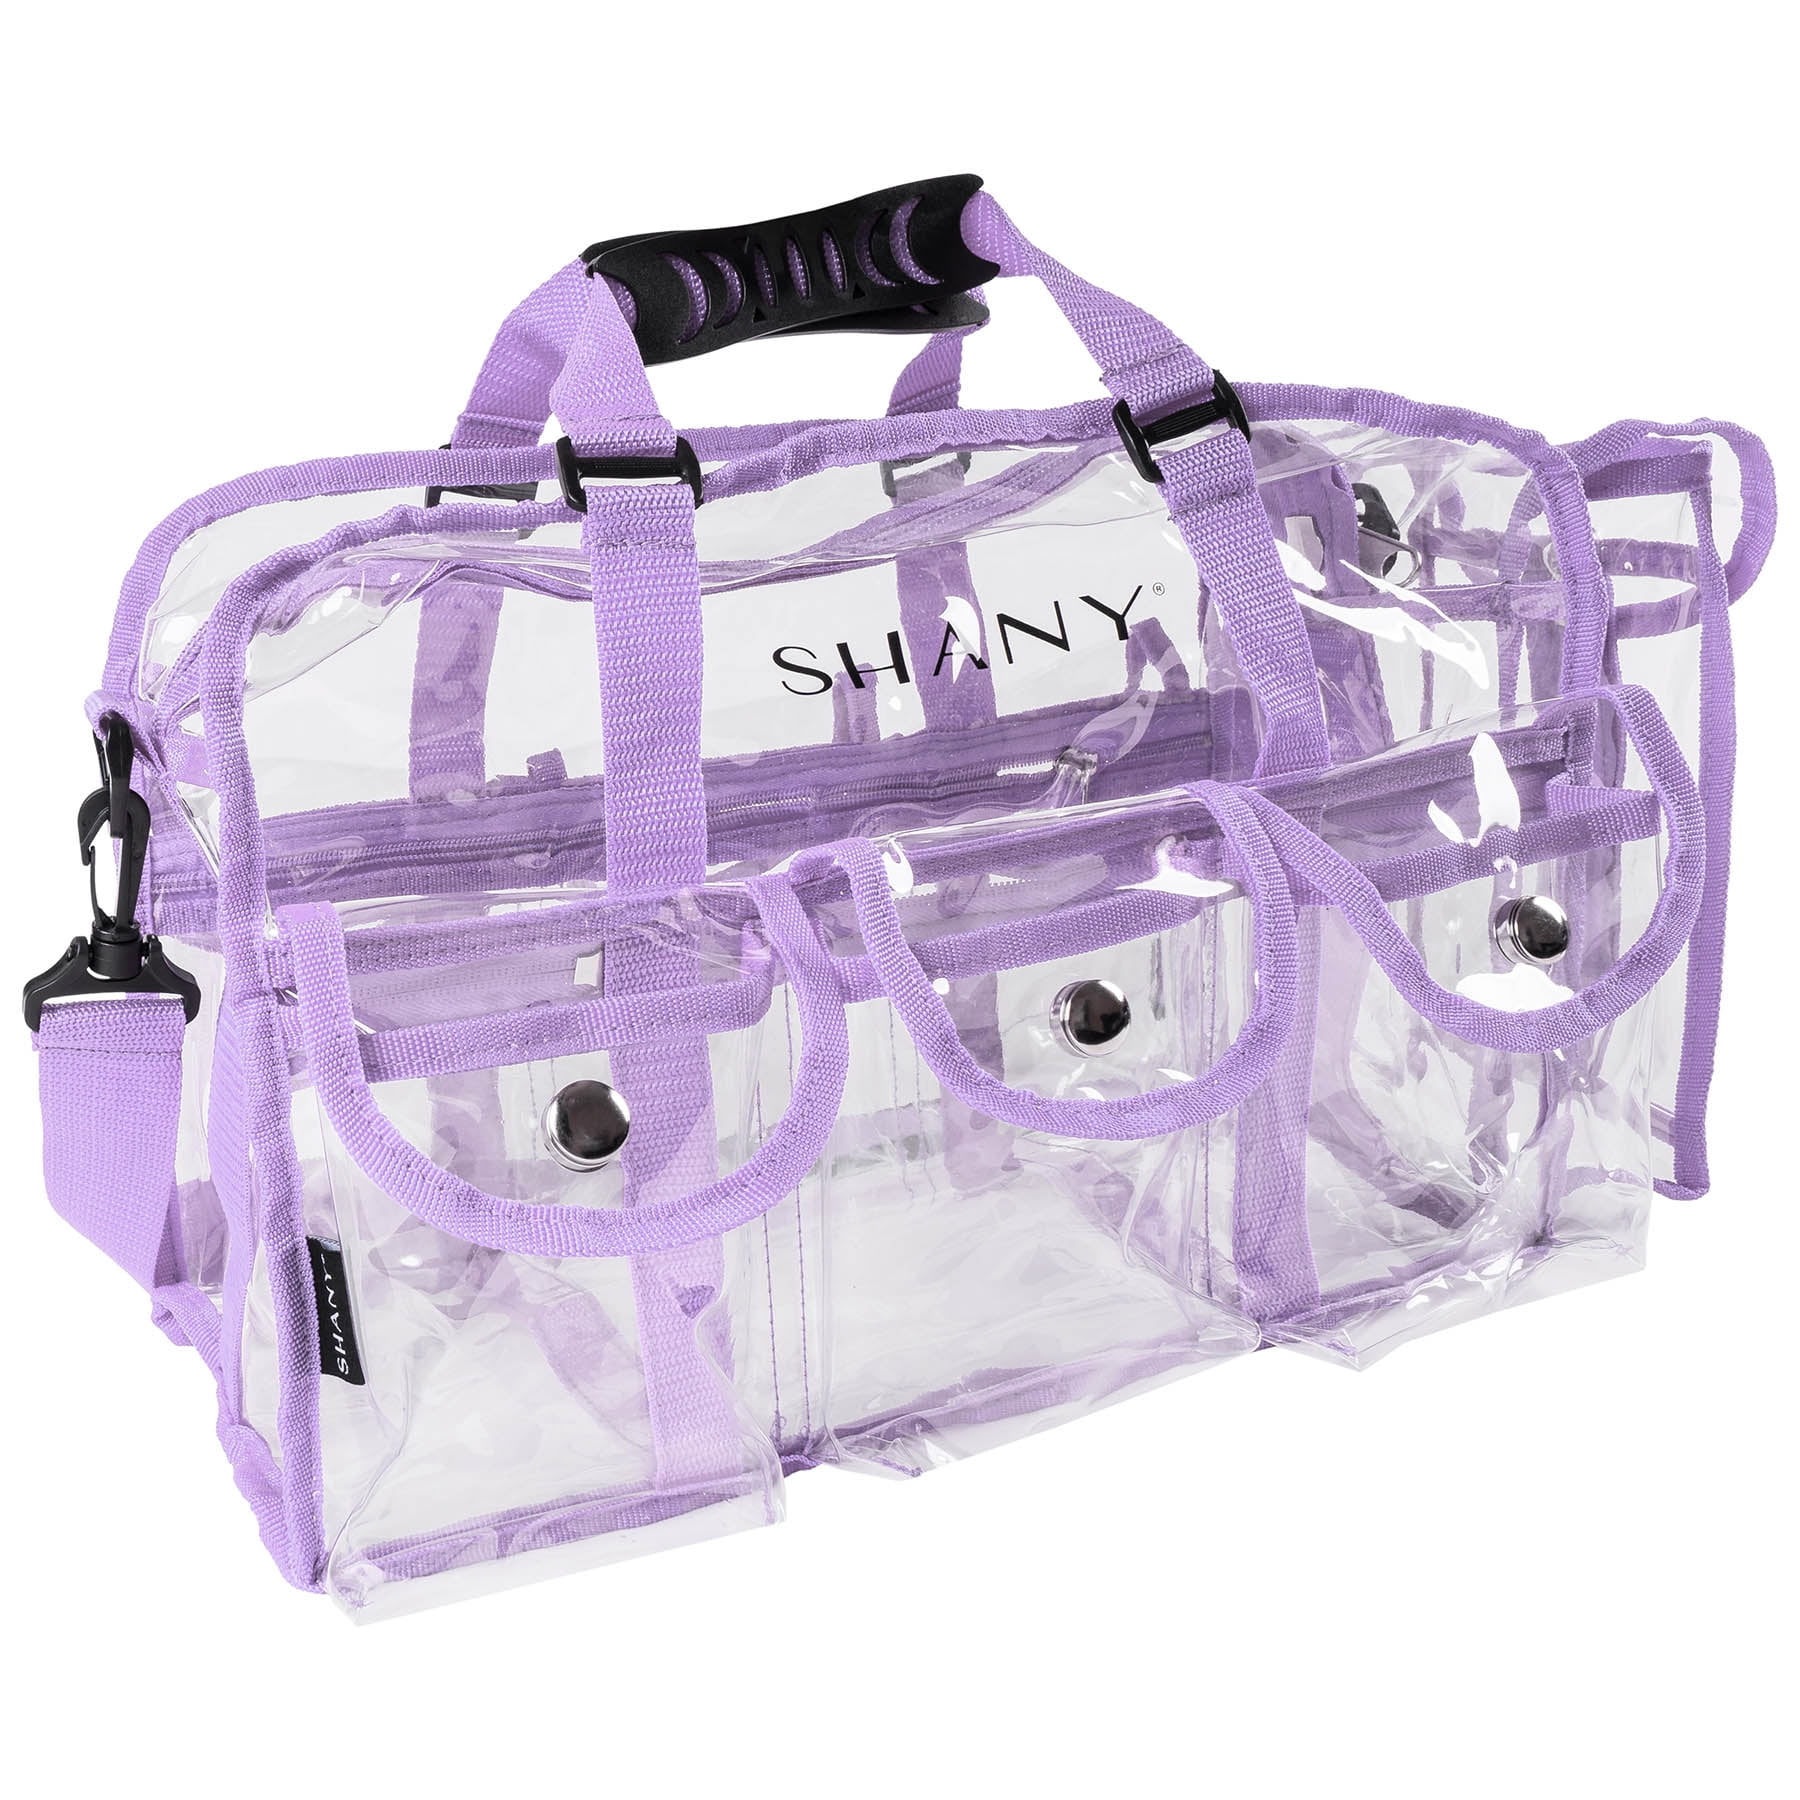 SHANY Clear PVC Makeup Bag PURPLE SH-PC01PR Large Professional Makeup Artist Rectangular Tote with Shoulder Strap and 5 External Pockets